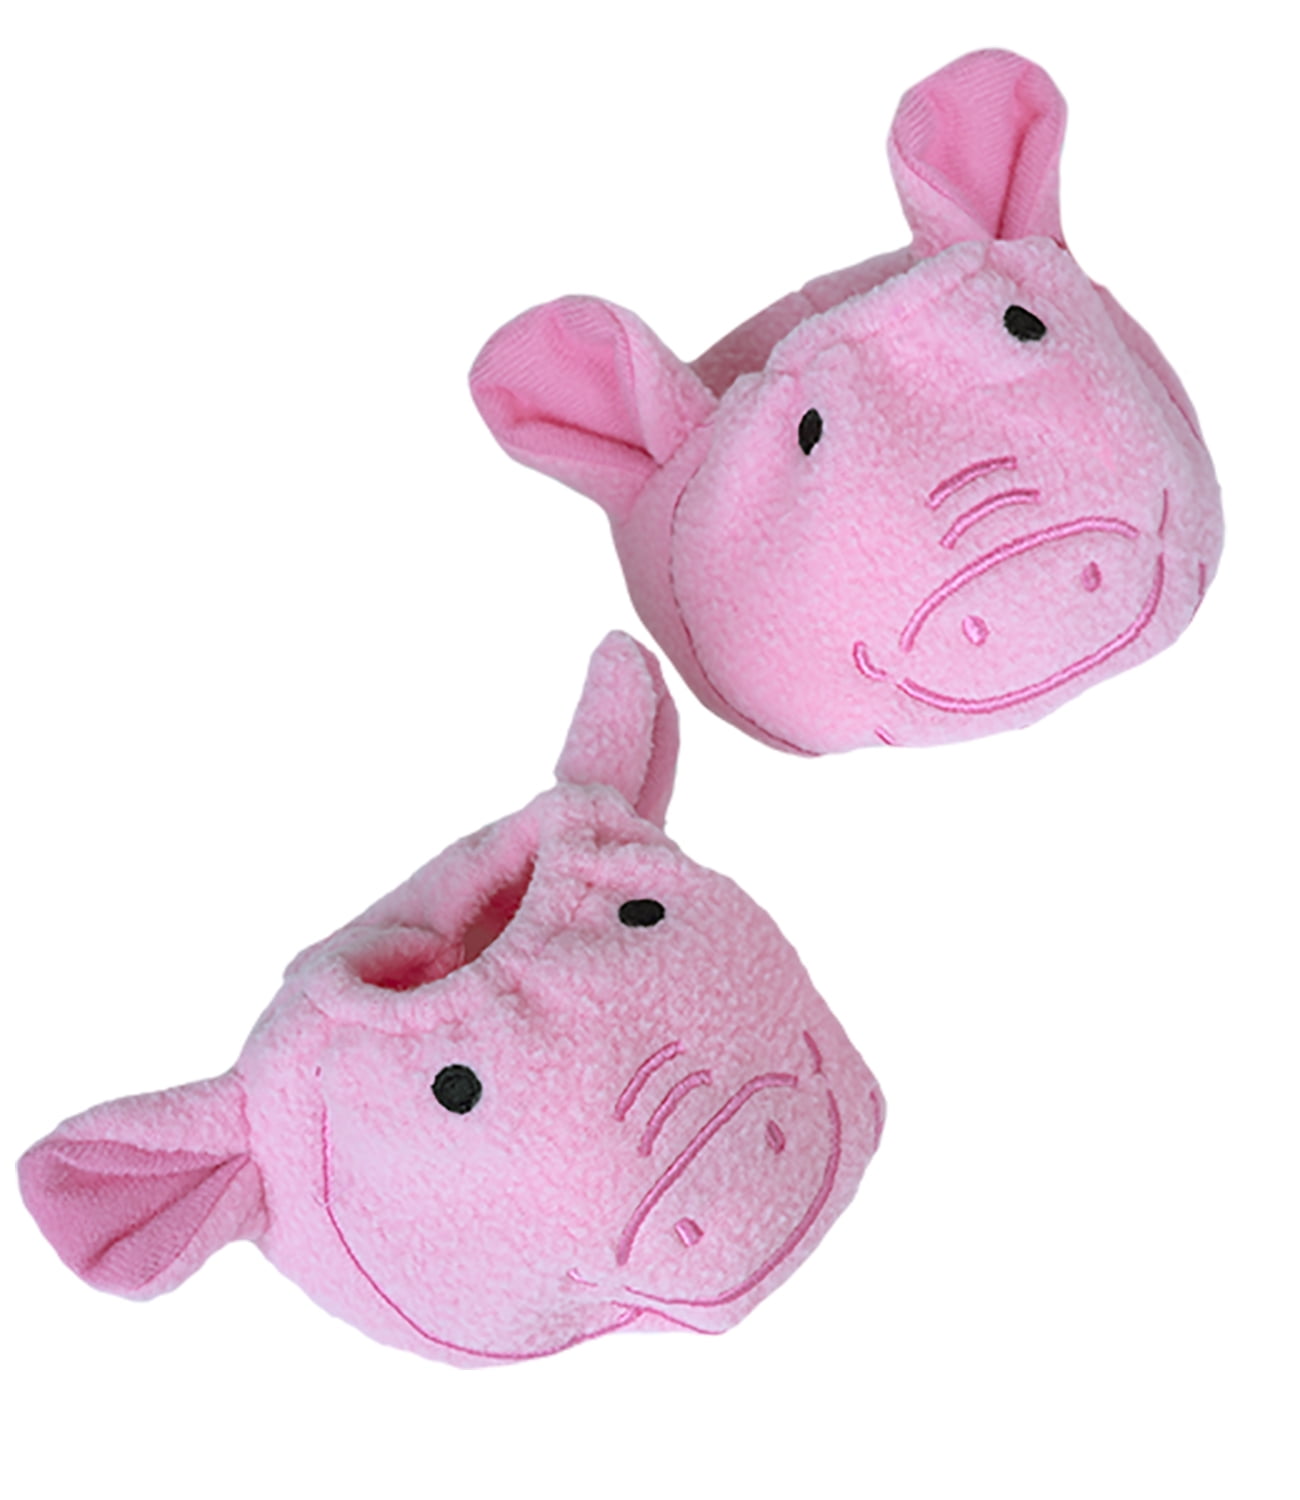 18" Build-a-bear and Make Your Piggy Slippers Teddy Bear Clothes Fits Most 14" 